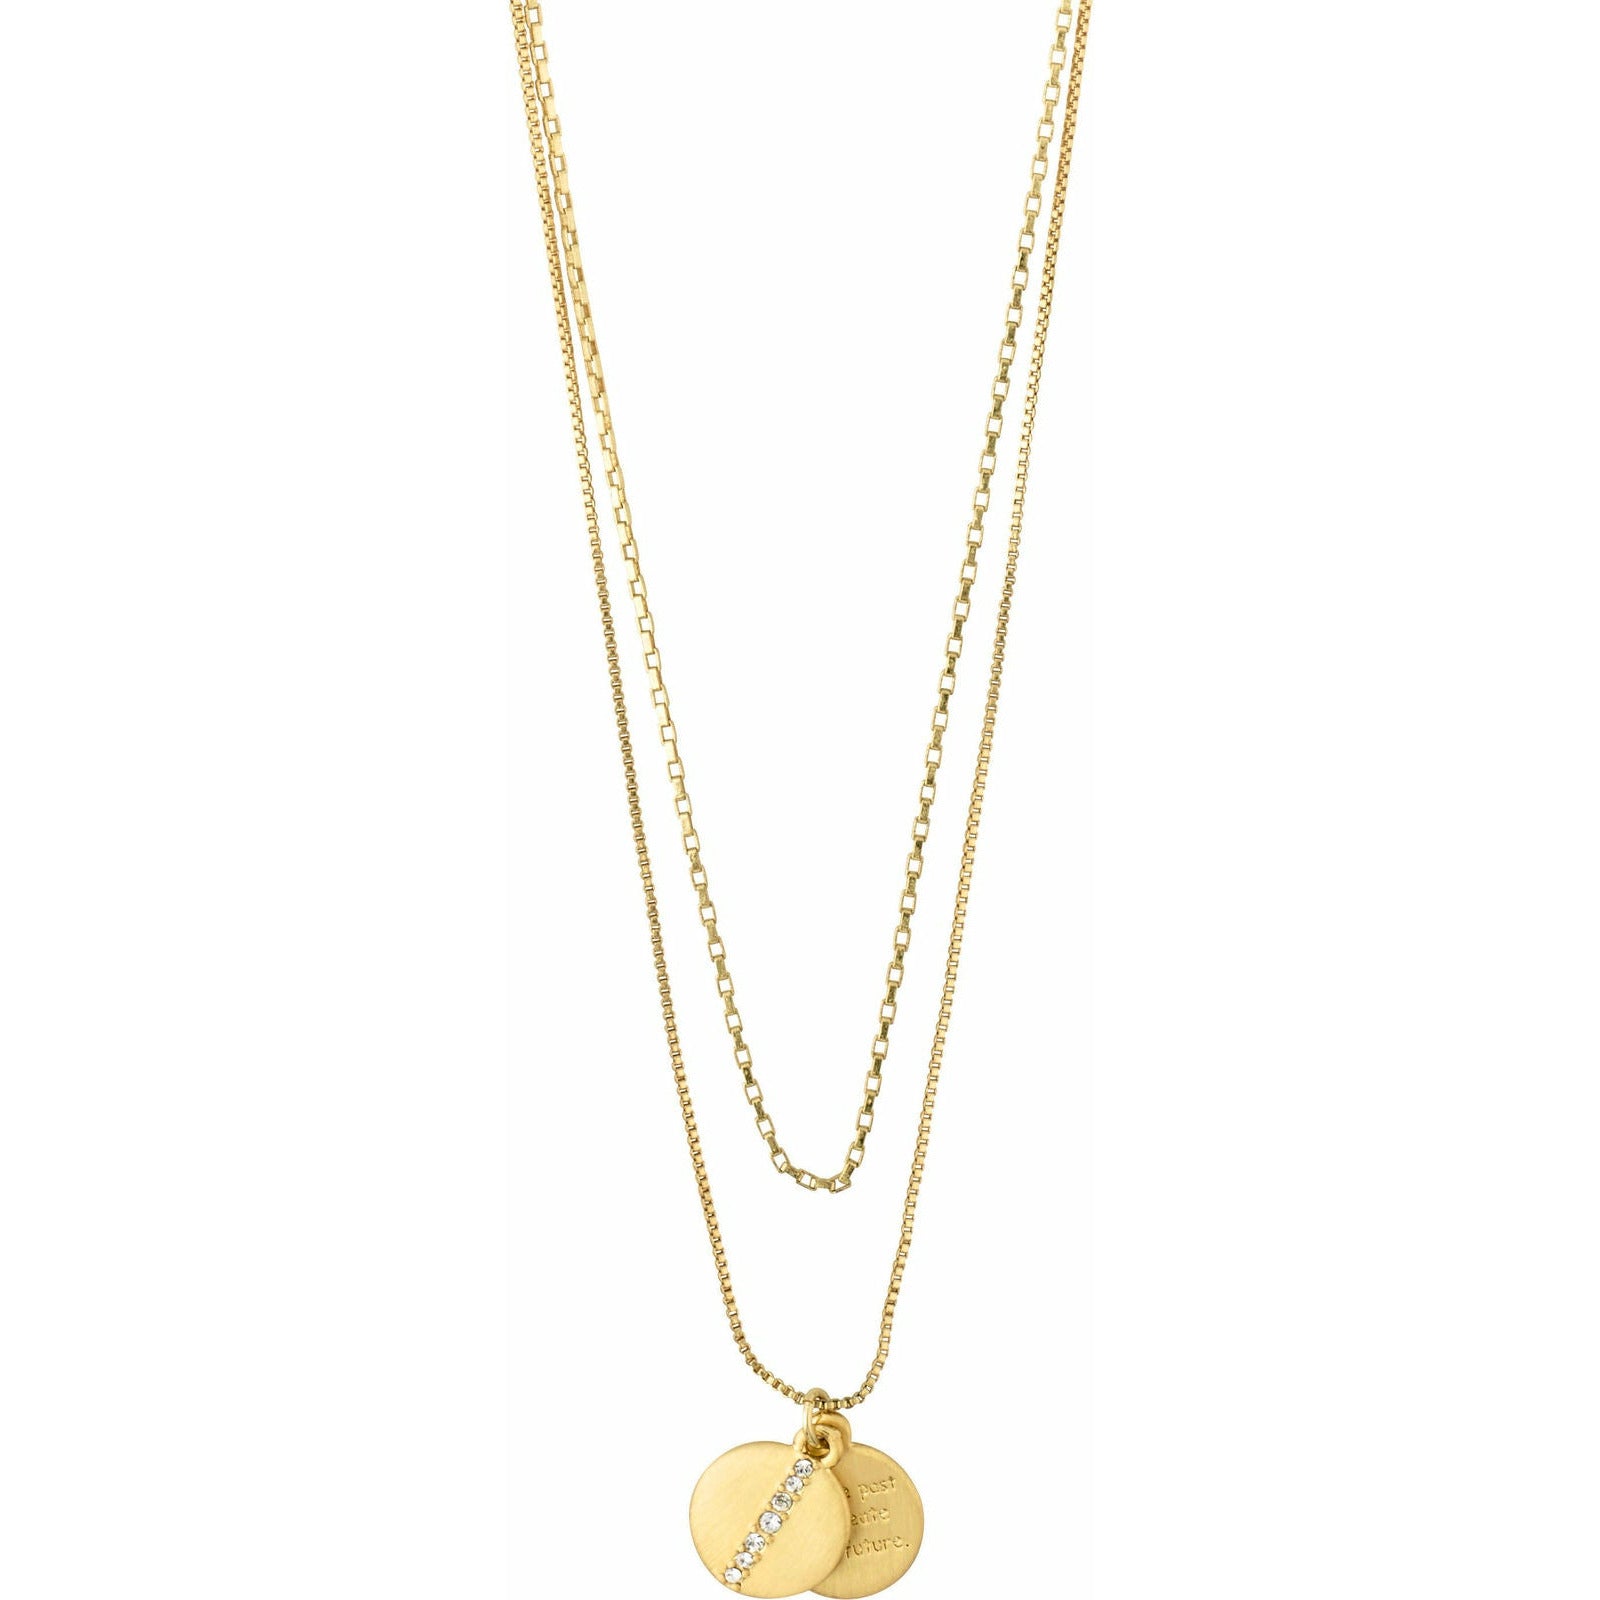 pillgrim jewellery casey gold-plated necklace